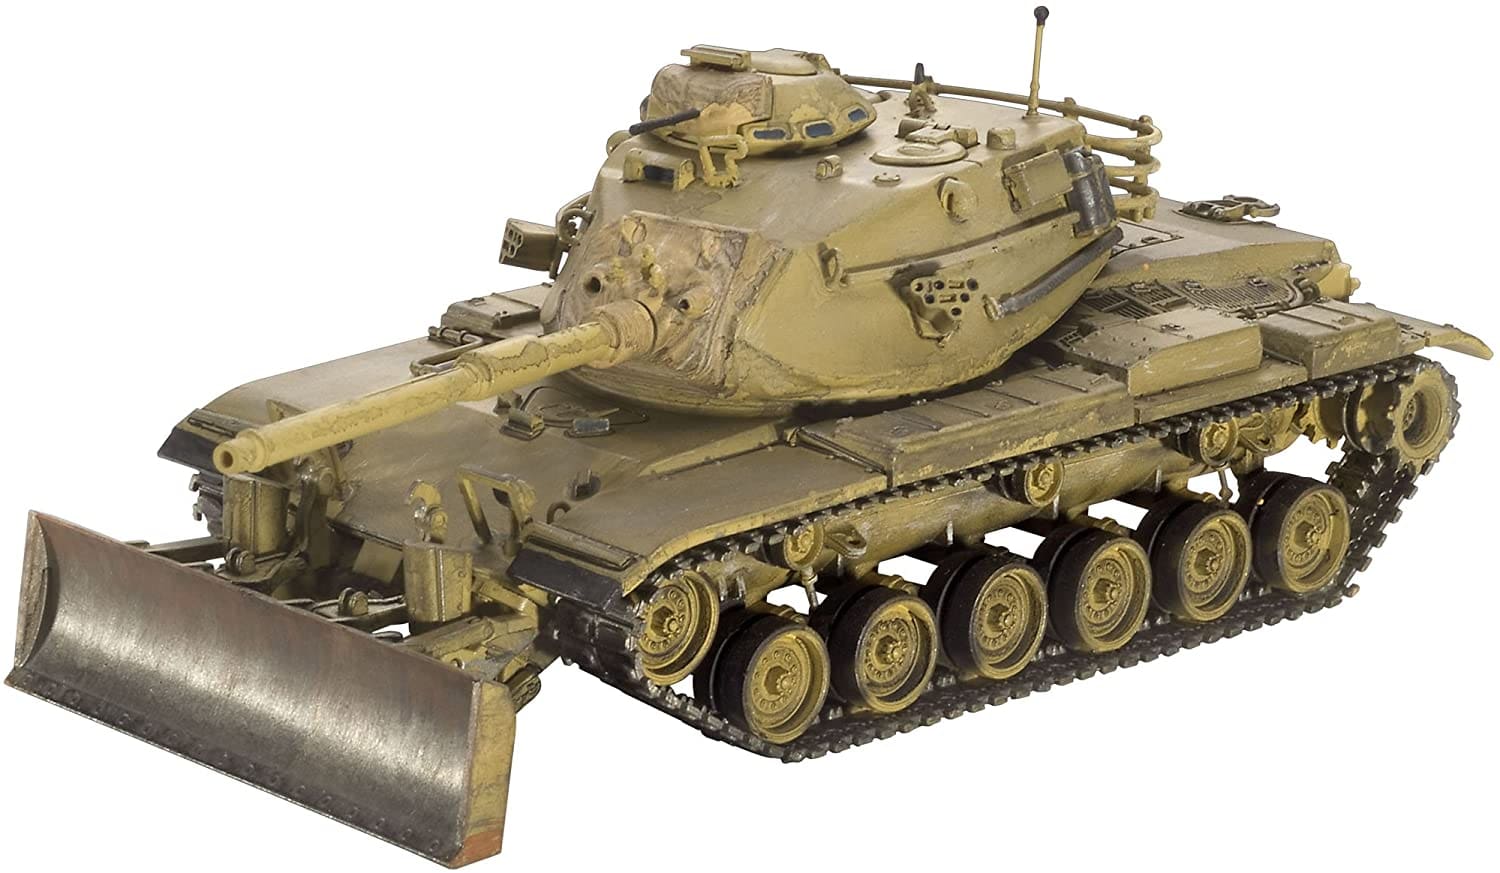 9 м 35 см. 2137 1/35 M60a3 w/m9 Bulldozer. 2137 Takom танк m60a3 w/m9 Bulldozer 1/35. 2142 Takom 1/35 танк m60a1 w/era & m9 Bulldozer. M60a3 Revell 1/72.